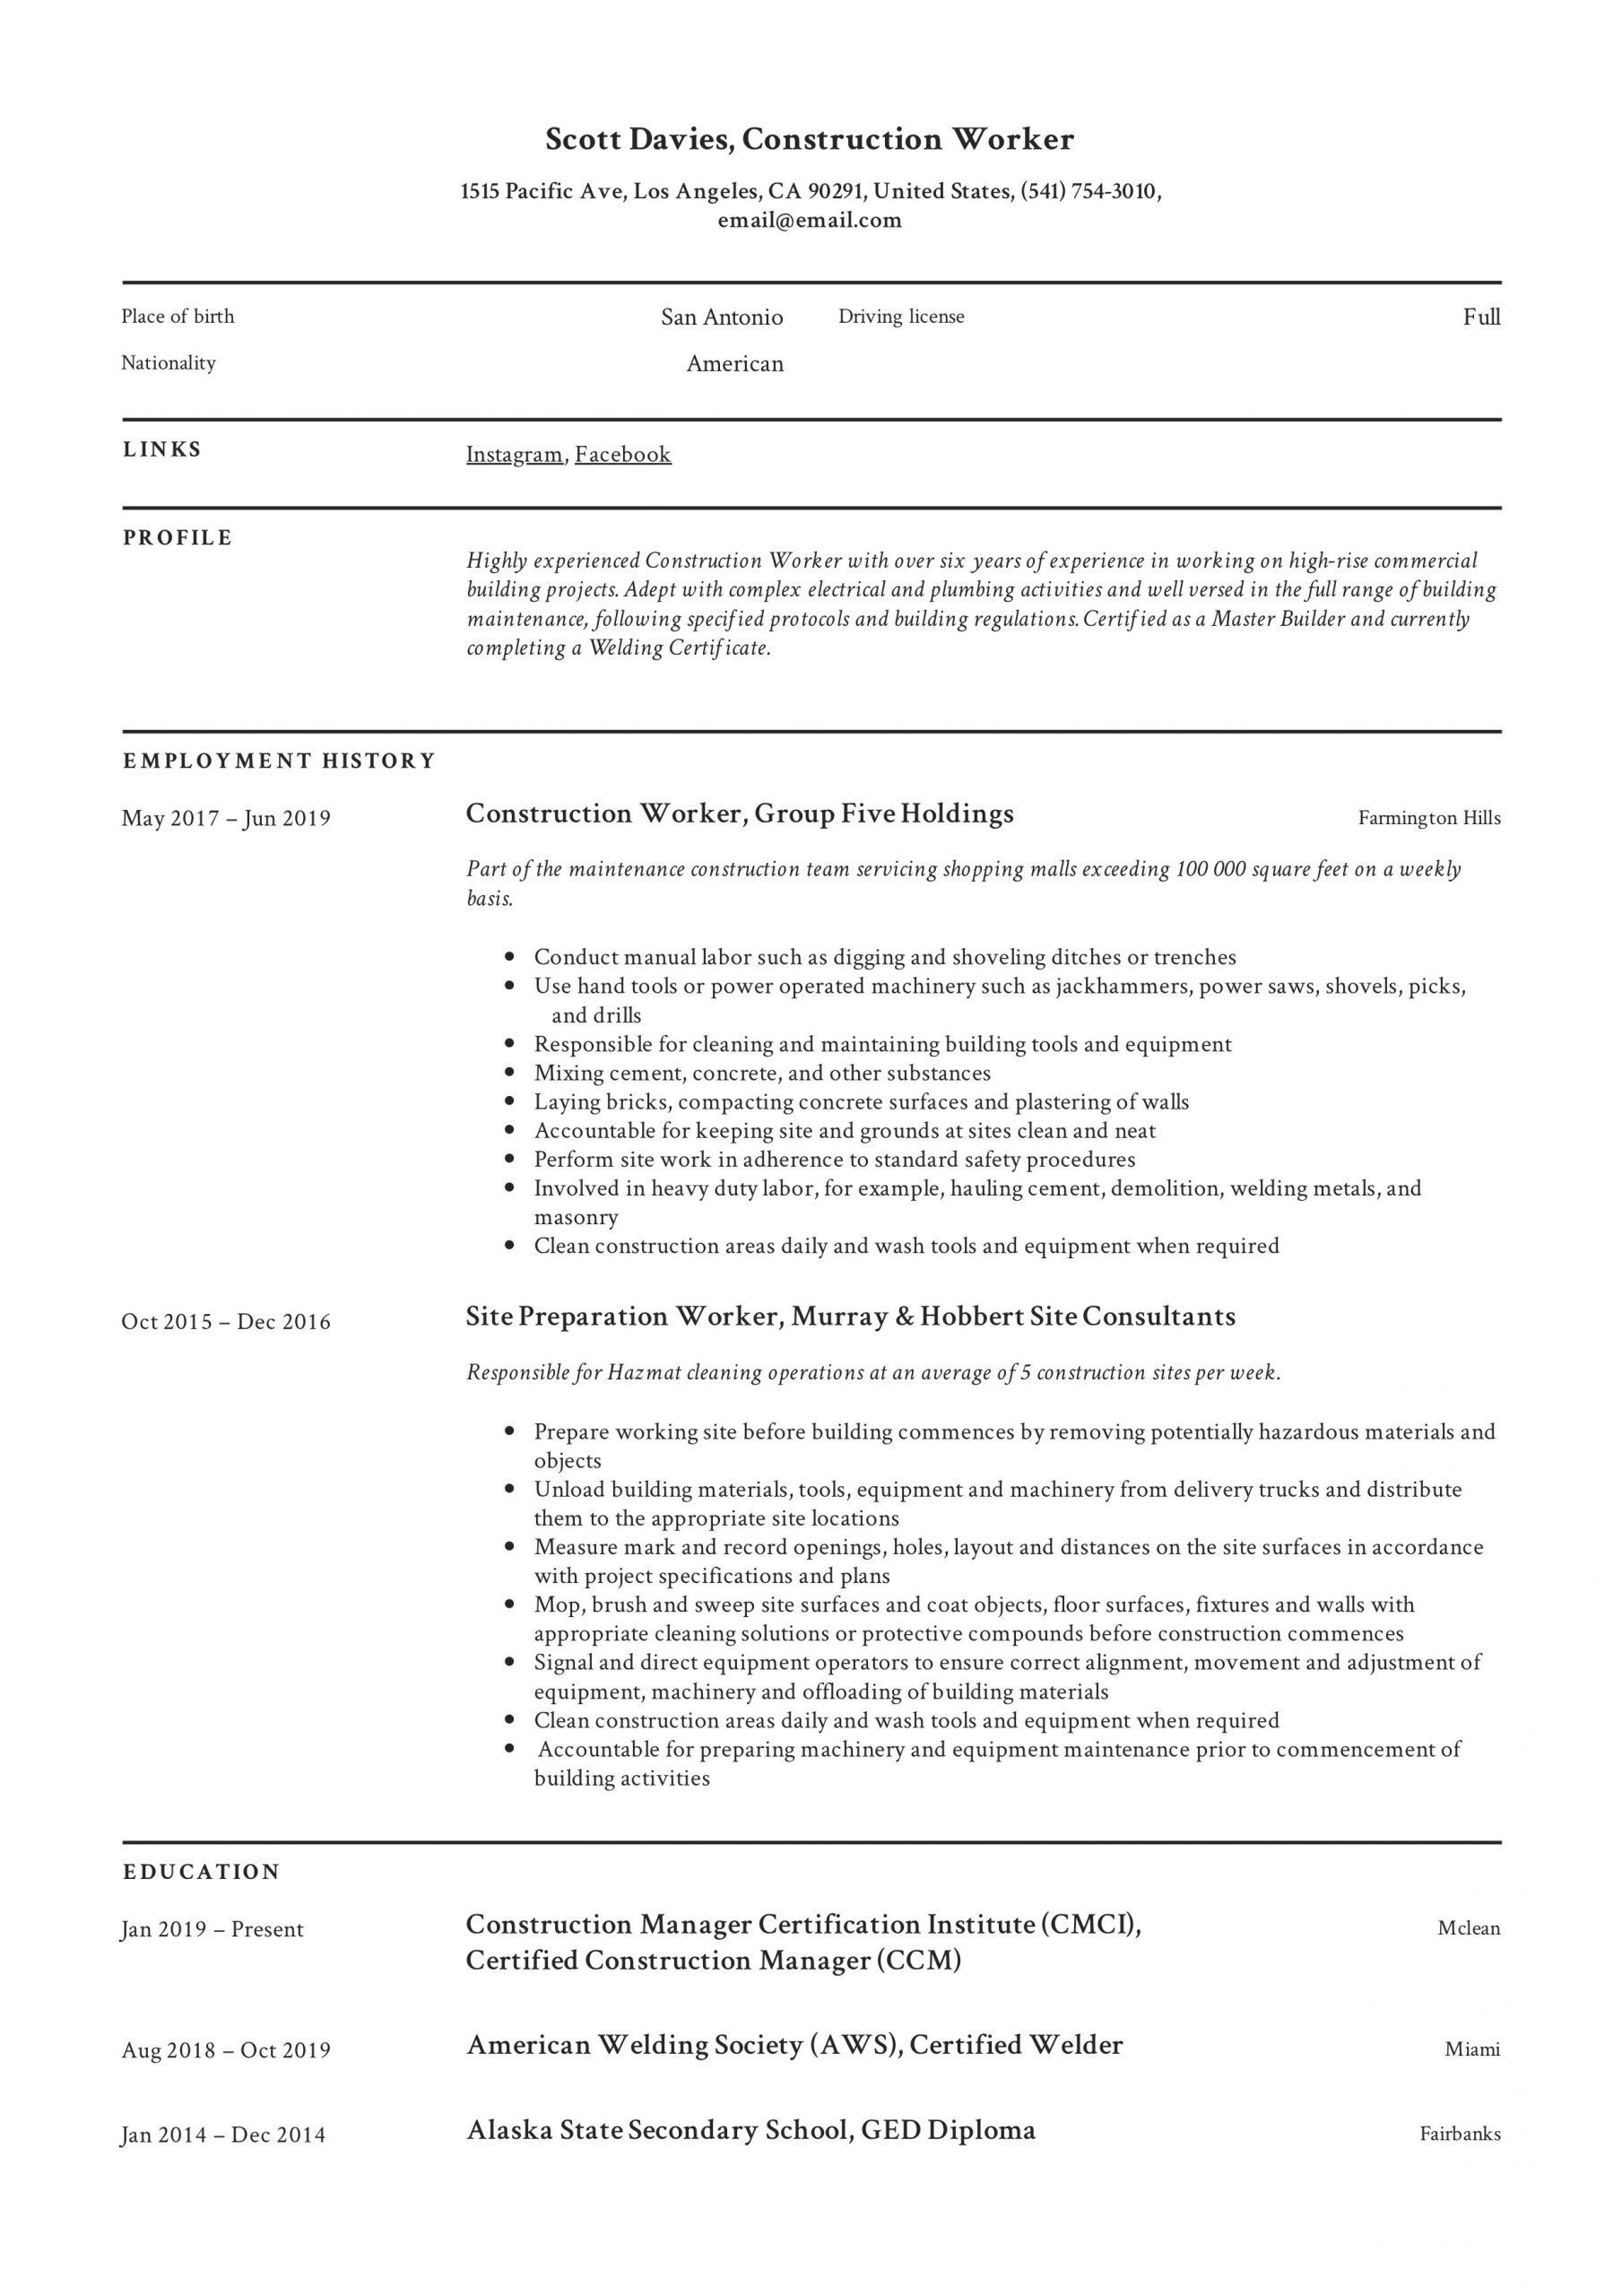 Construction Worker Resume Examples and Samples Construction Worker Resume & Writing Guide  12 Templates 2020